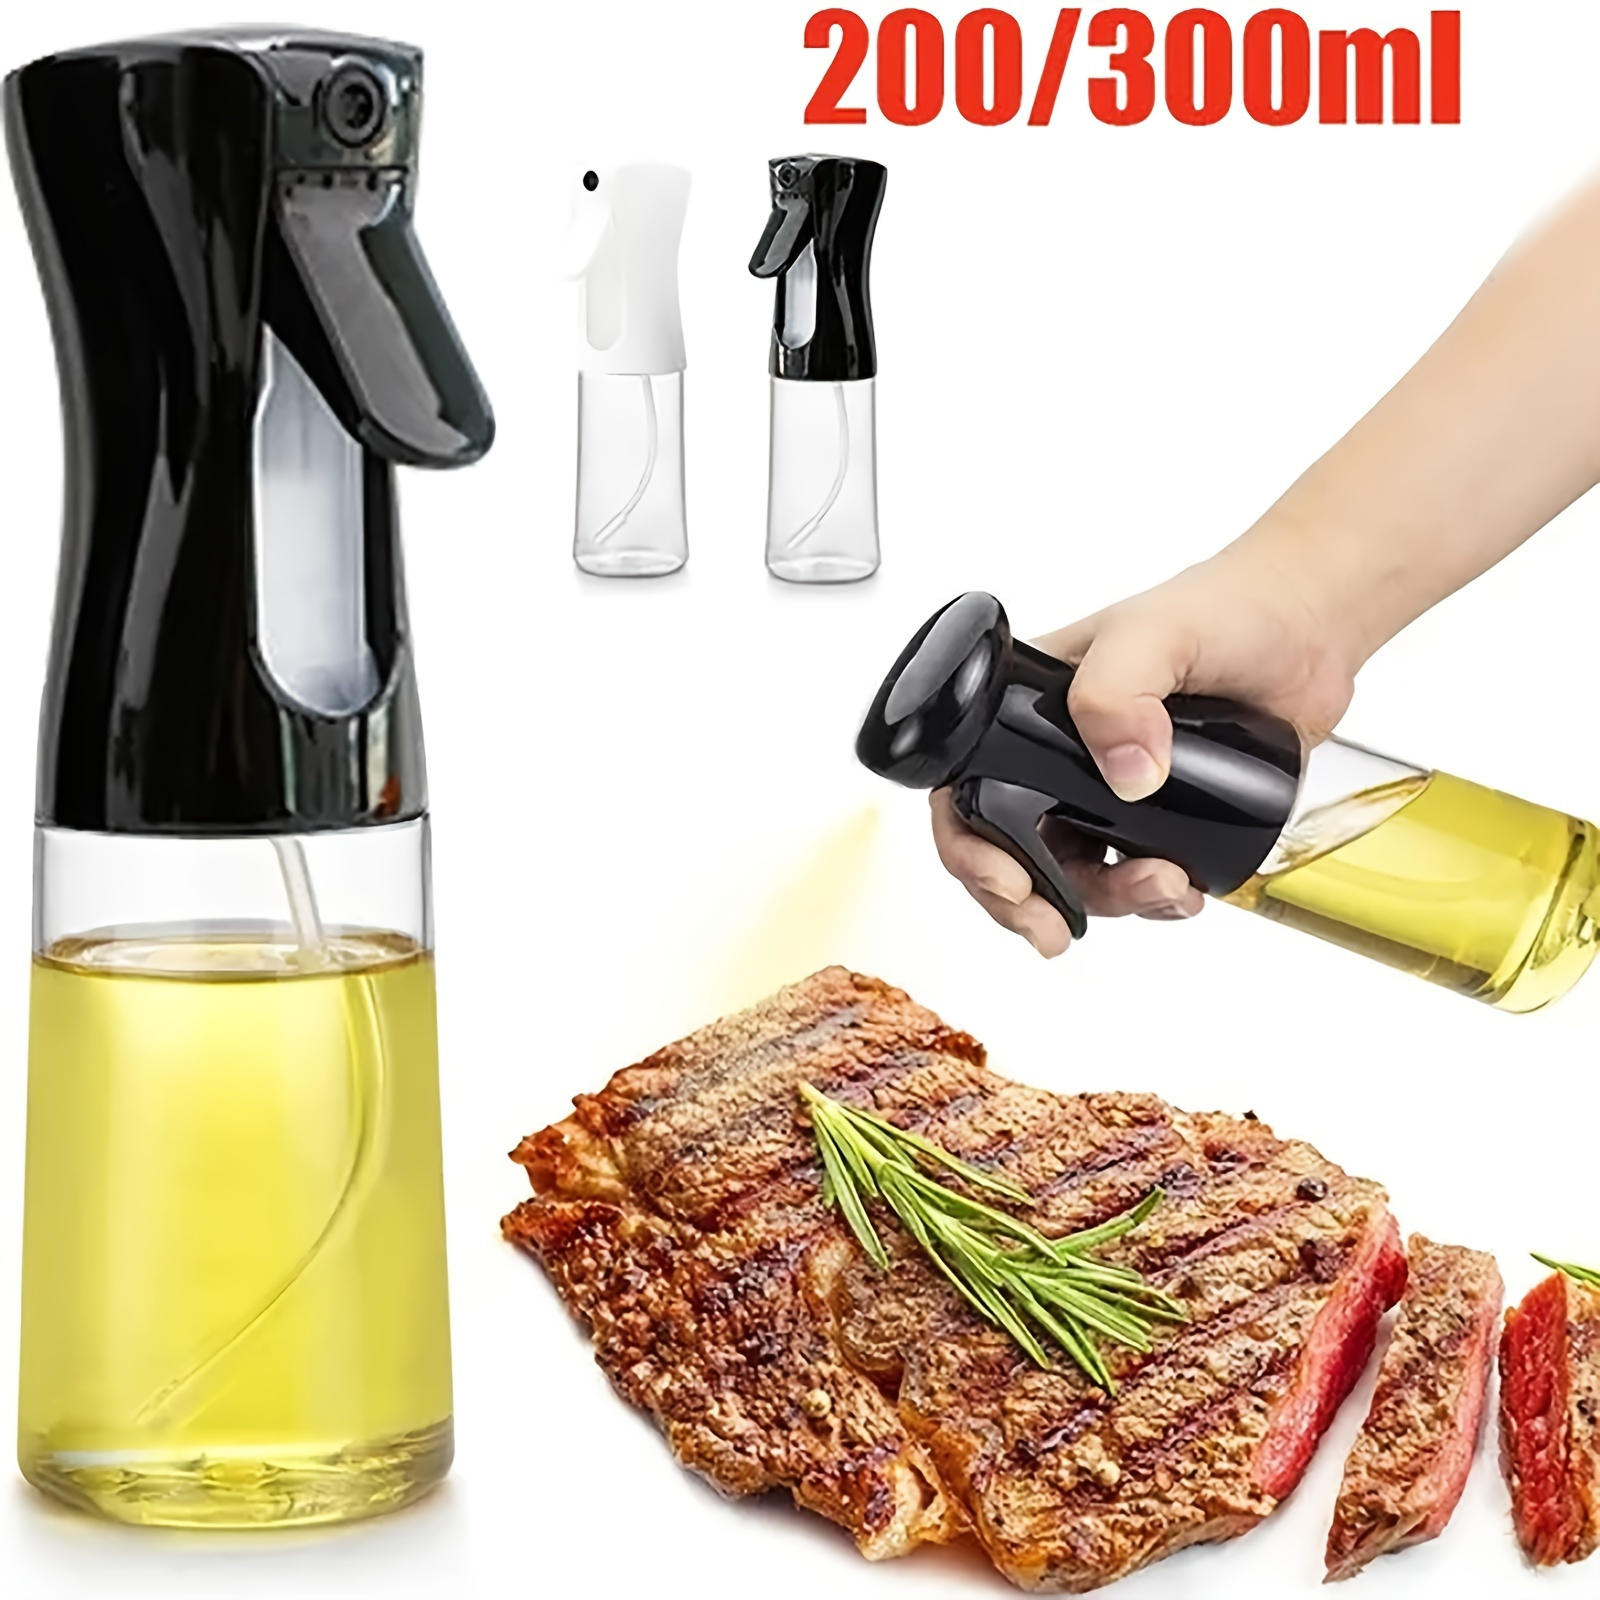 

200/300ml/650ml Plastic Oil Bottle Dispenser: The Perfect Cooking Oil Sprayer For Grilling, Roasting & More - Kitchen Accessories